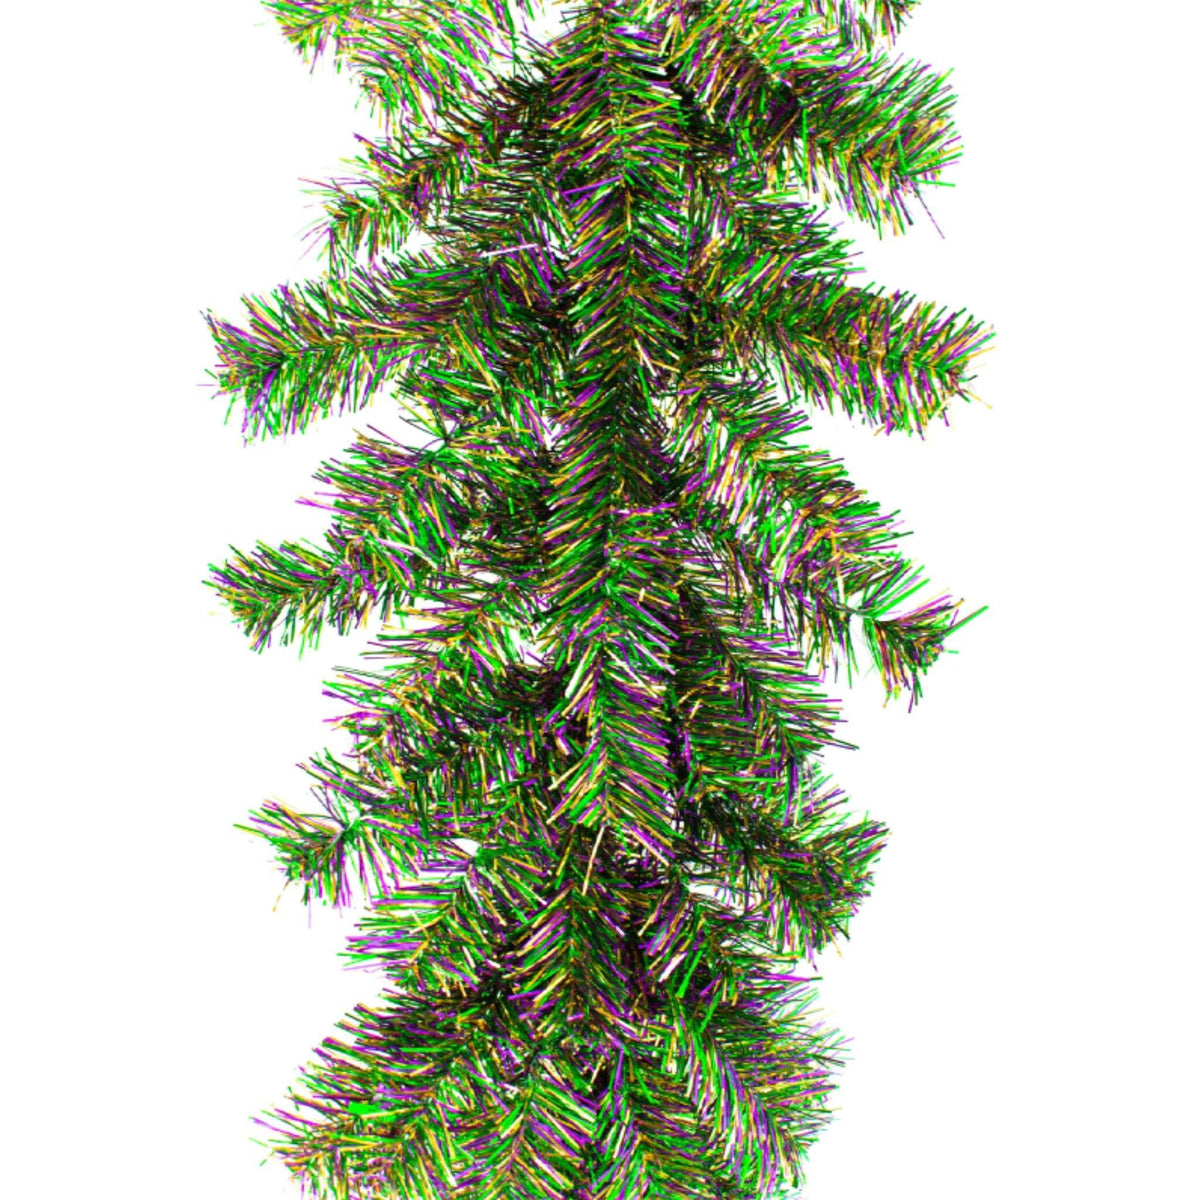 Shop for Lee Display's brand new 6FT Mardi Gras themed Tinsel Brush Garland on sale now at leedisplay.com.